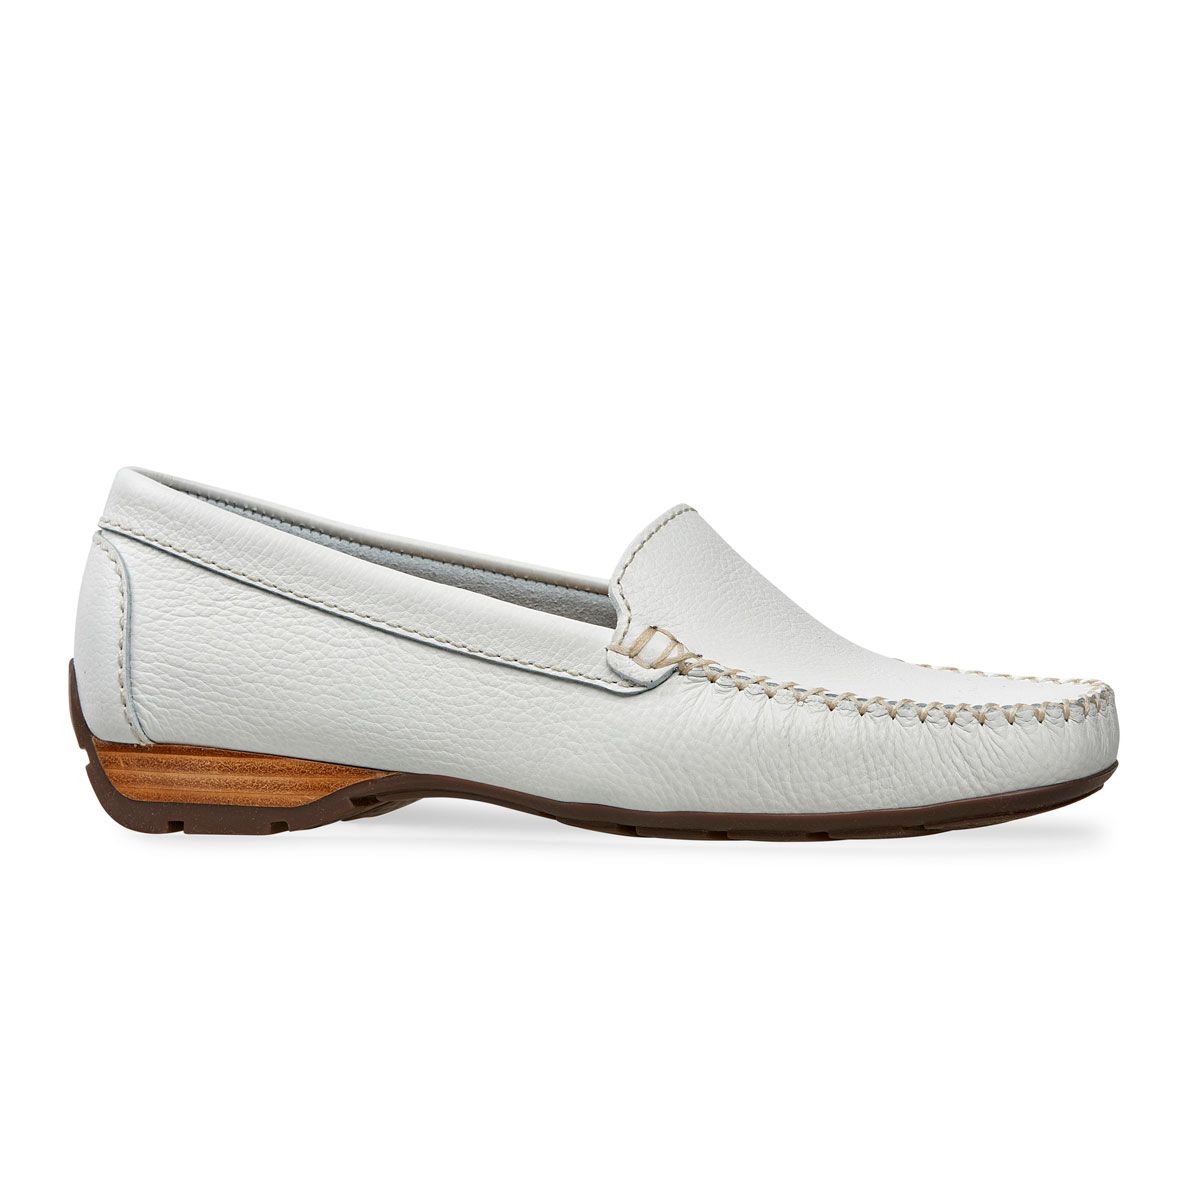 Van Dal Shoes - Sanson Casual Loafers in White Leather